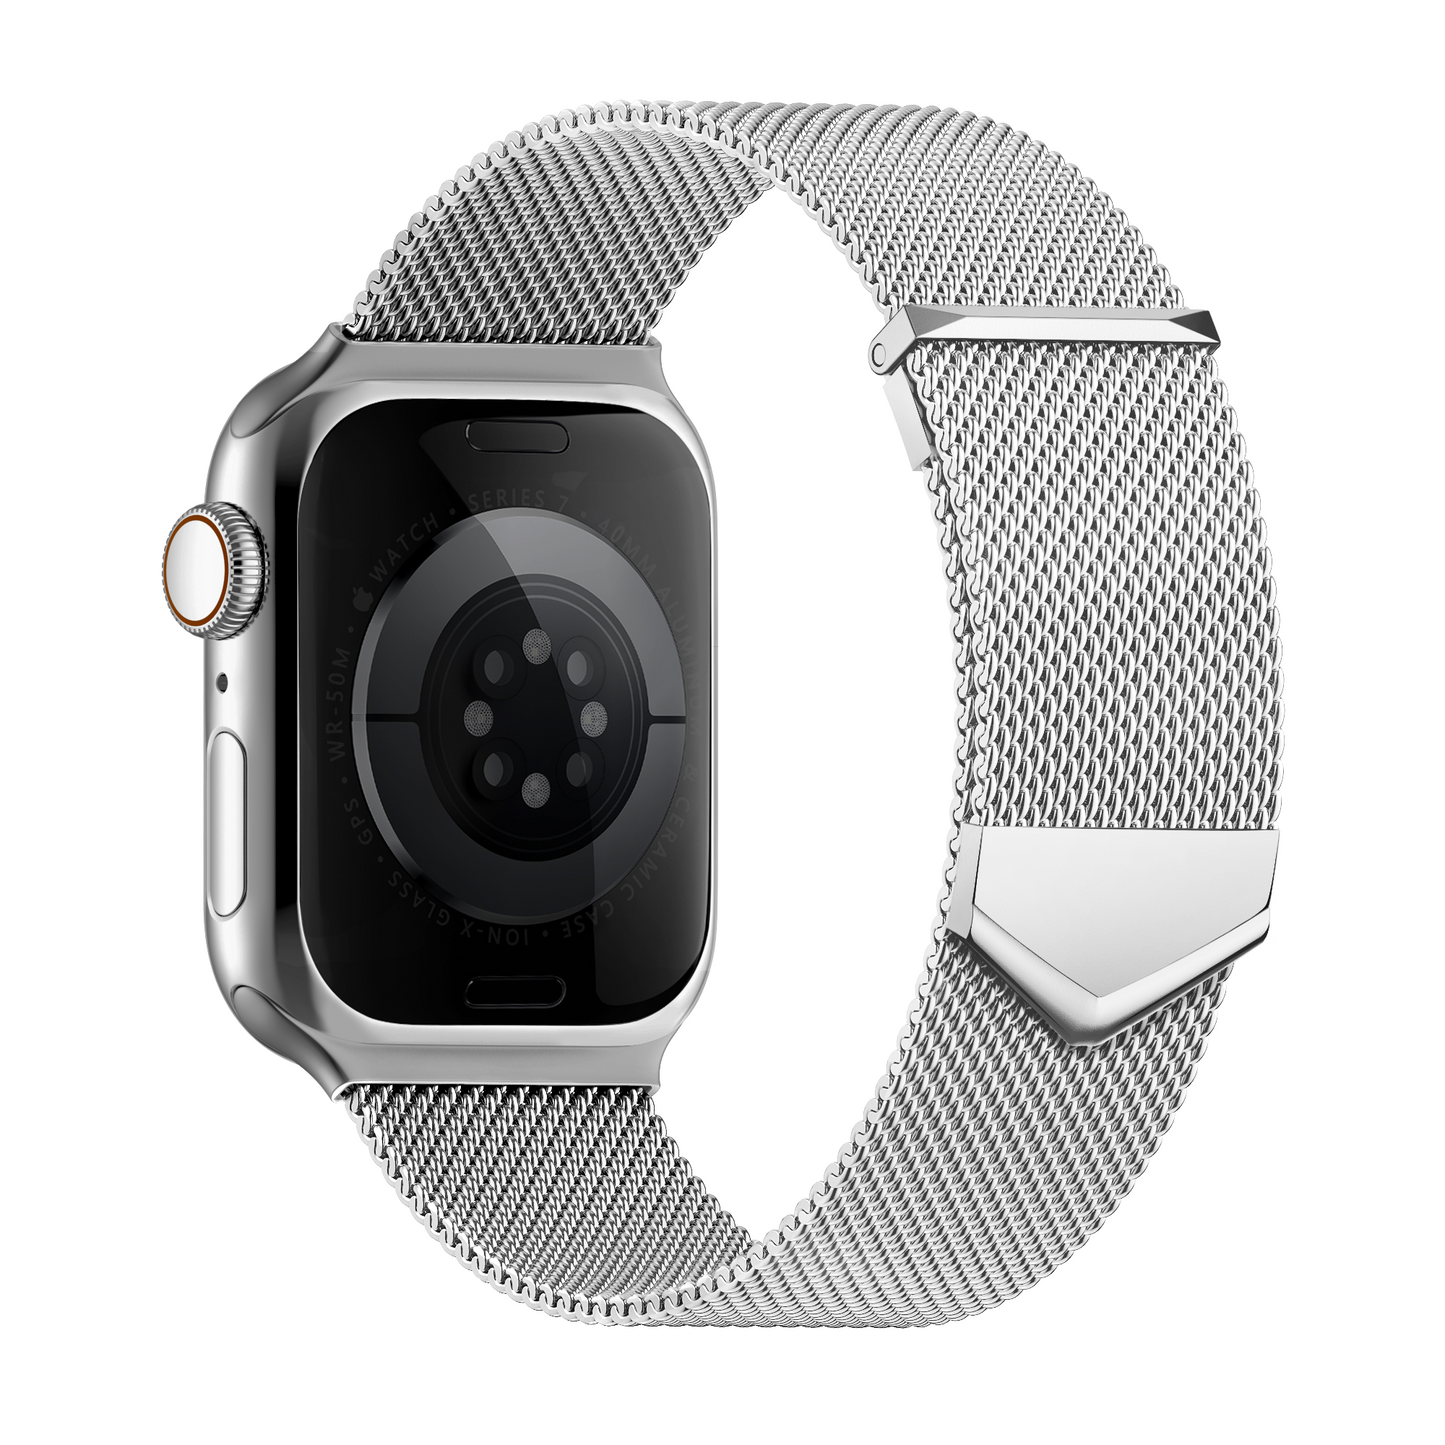 Double Magnet Stainless Steel Bracelet for Apple Watch